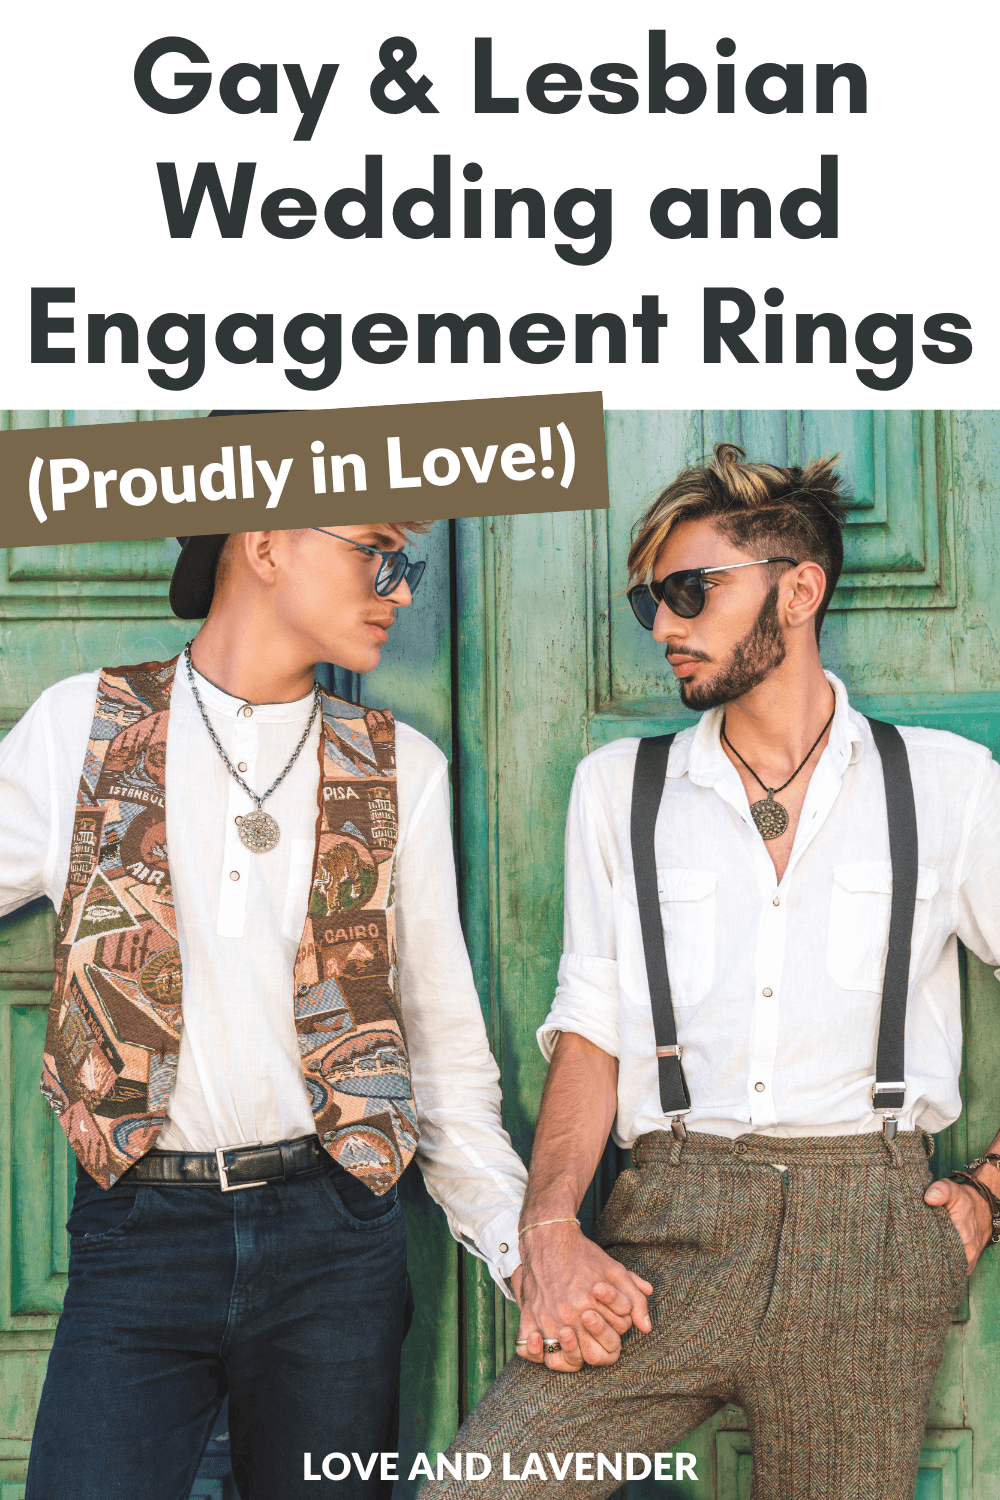 9 Gay & Lesbian Wedding and Engagement Rings (Proudly in Love!)